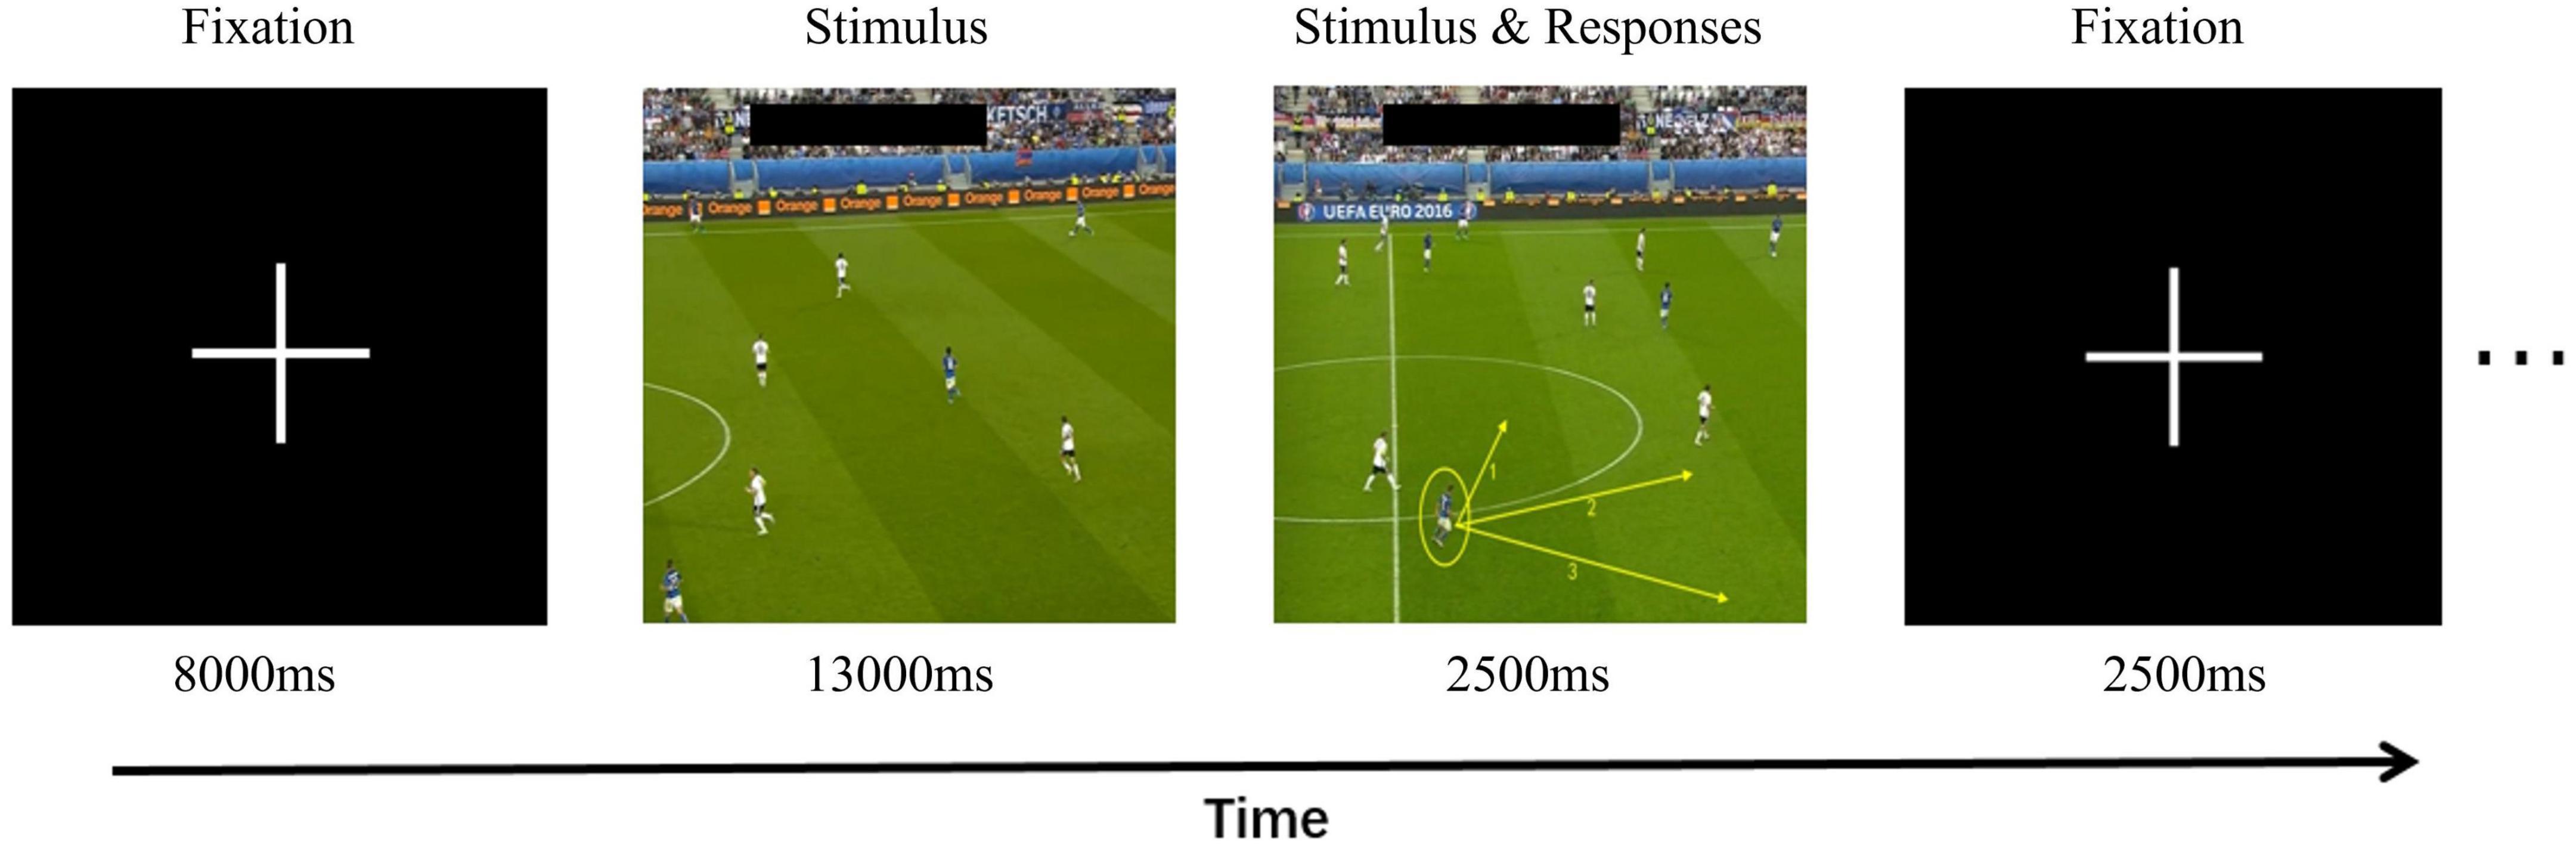 Xxx Tenvideo - Frontiers | Characteristics of brain activation in high-level football  players at different stages of decision-making tasks off the ball: an fMRI  study